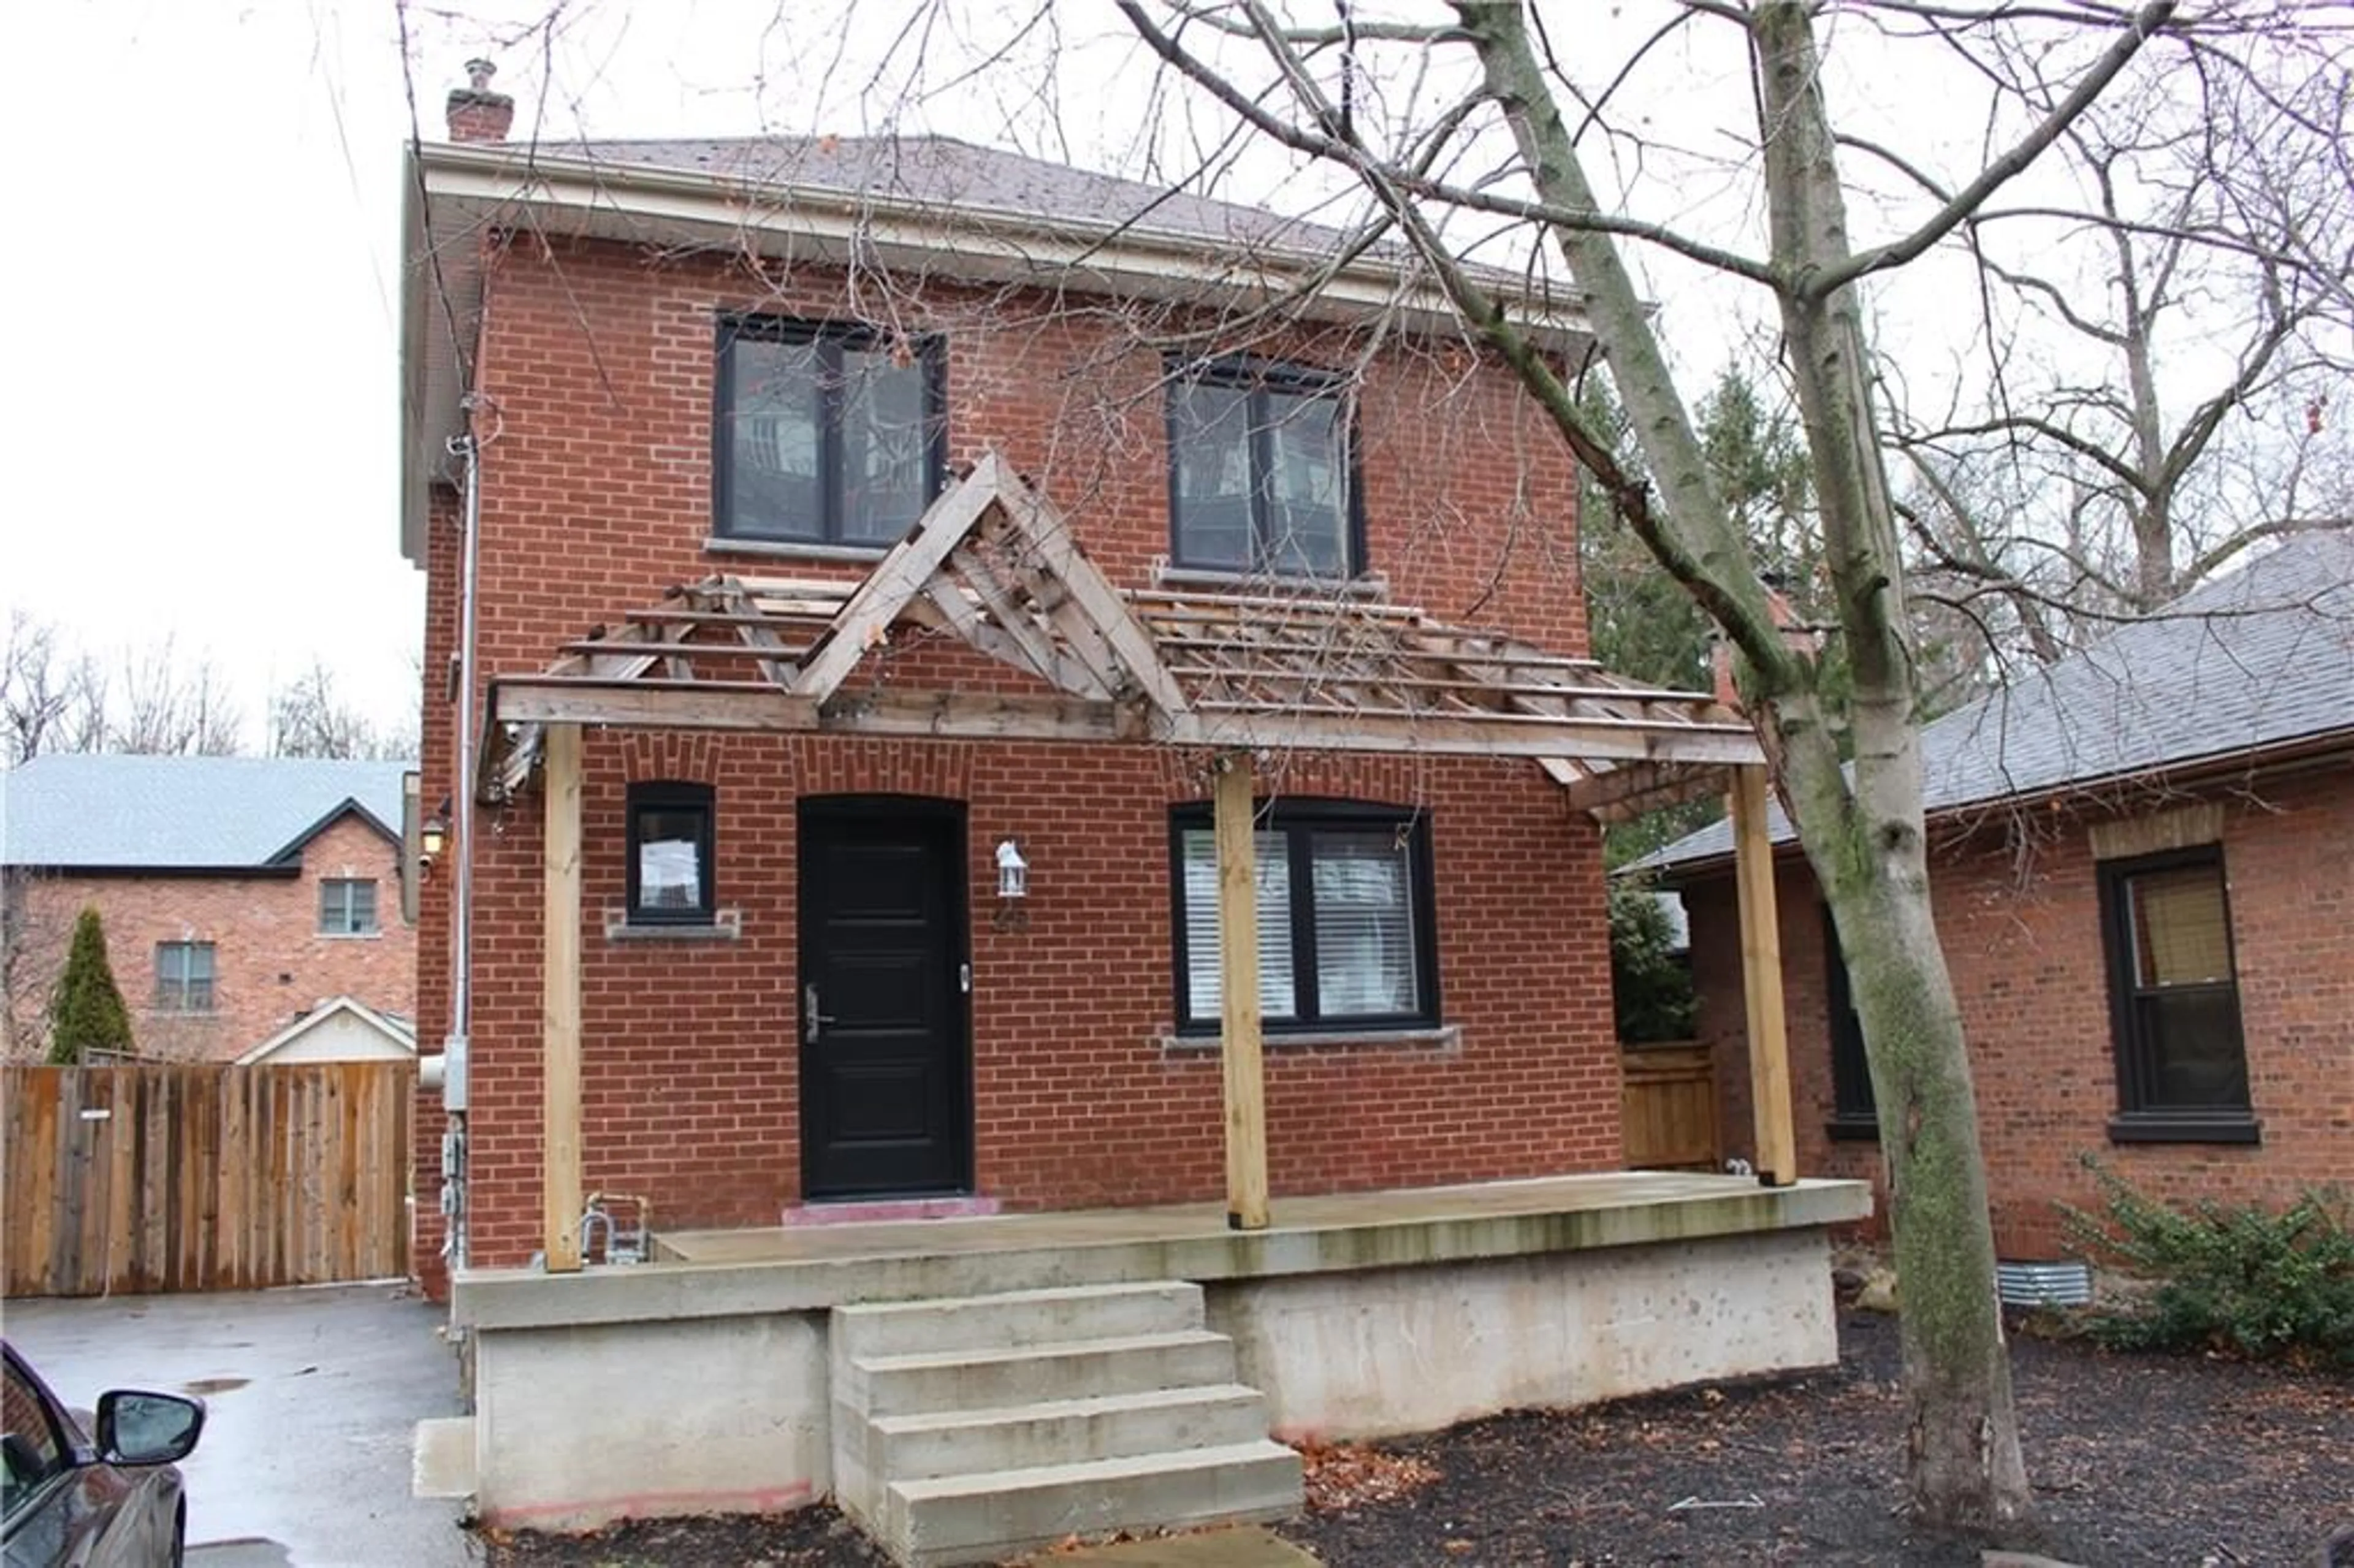 Home with unknown exterior material for 25 PARK St, Hamilton Ontario L9H 1C9